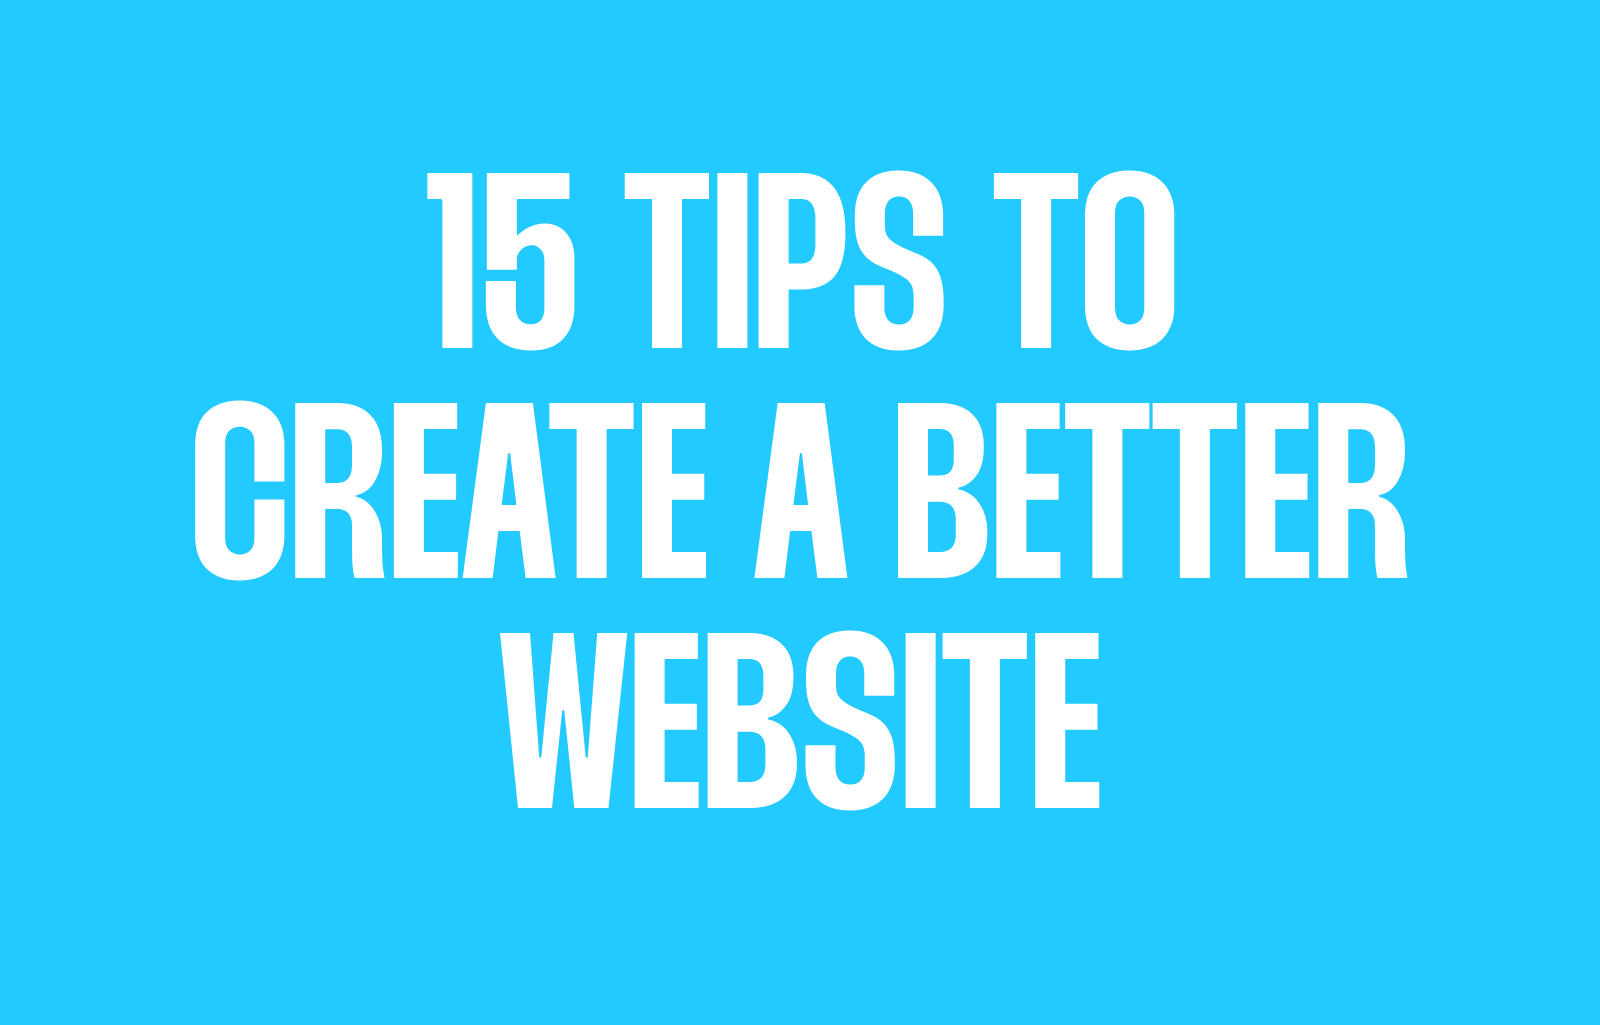 15 Tips to create better websites